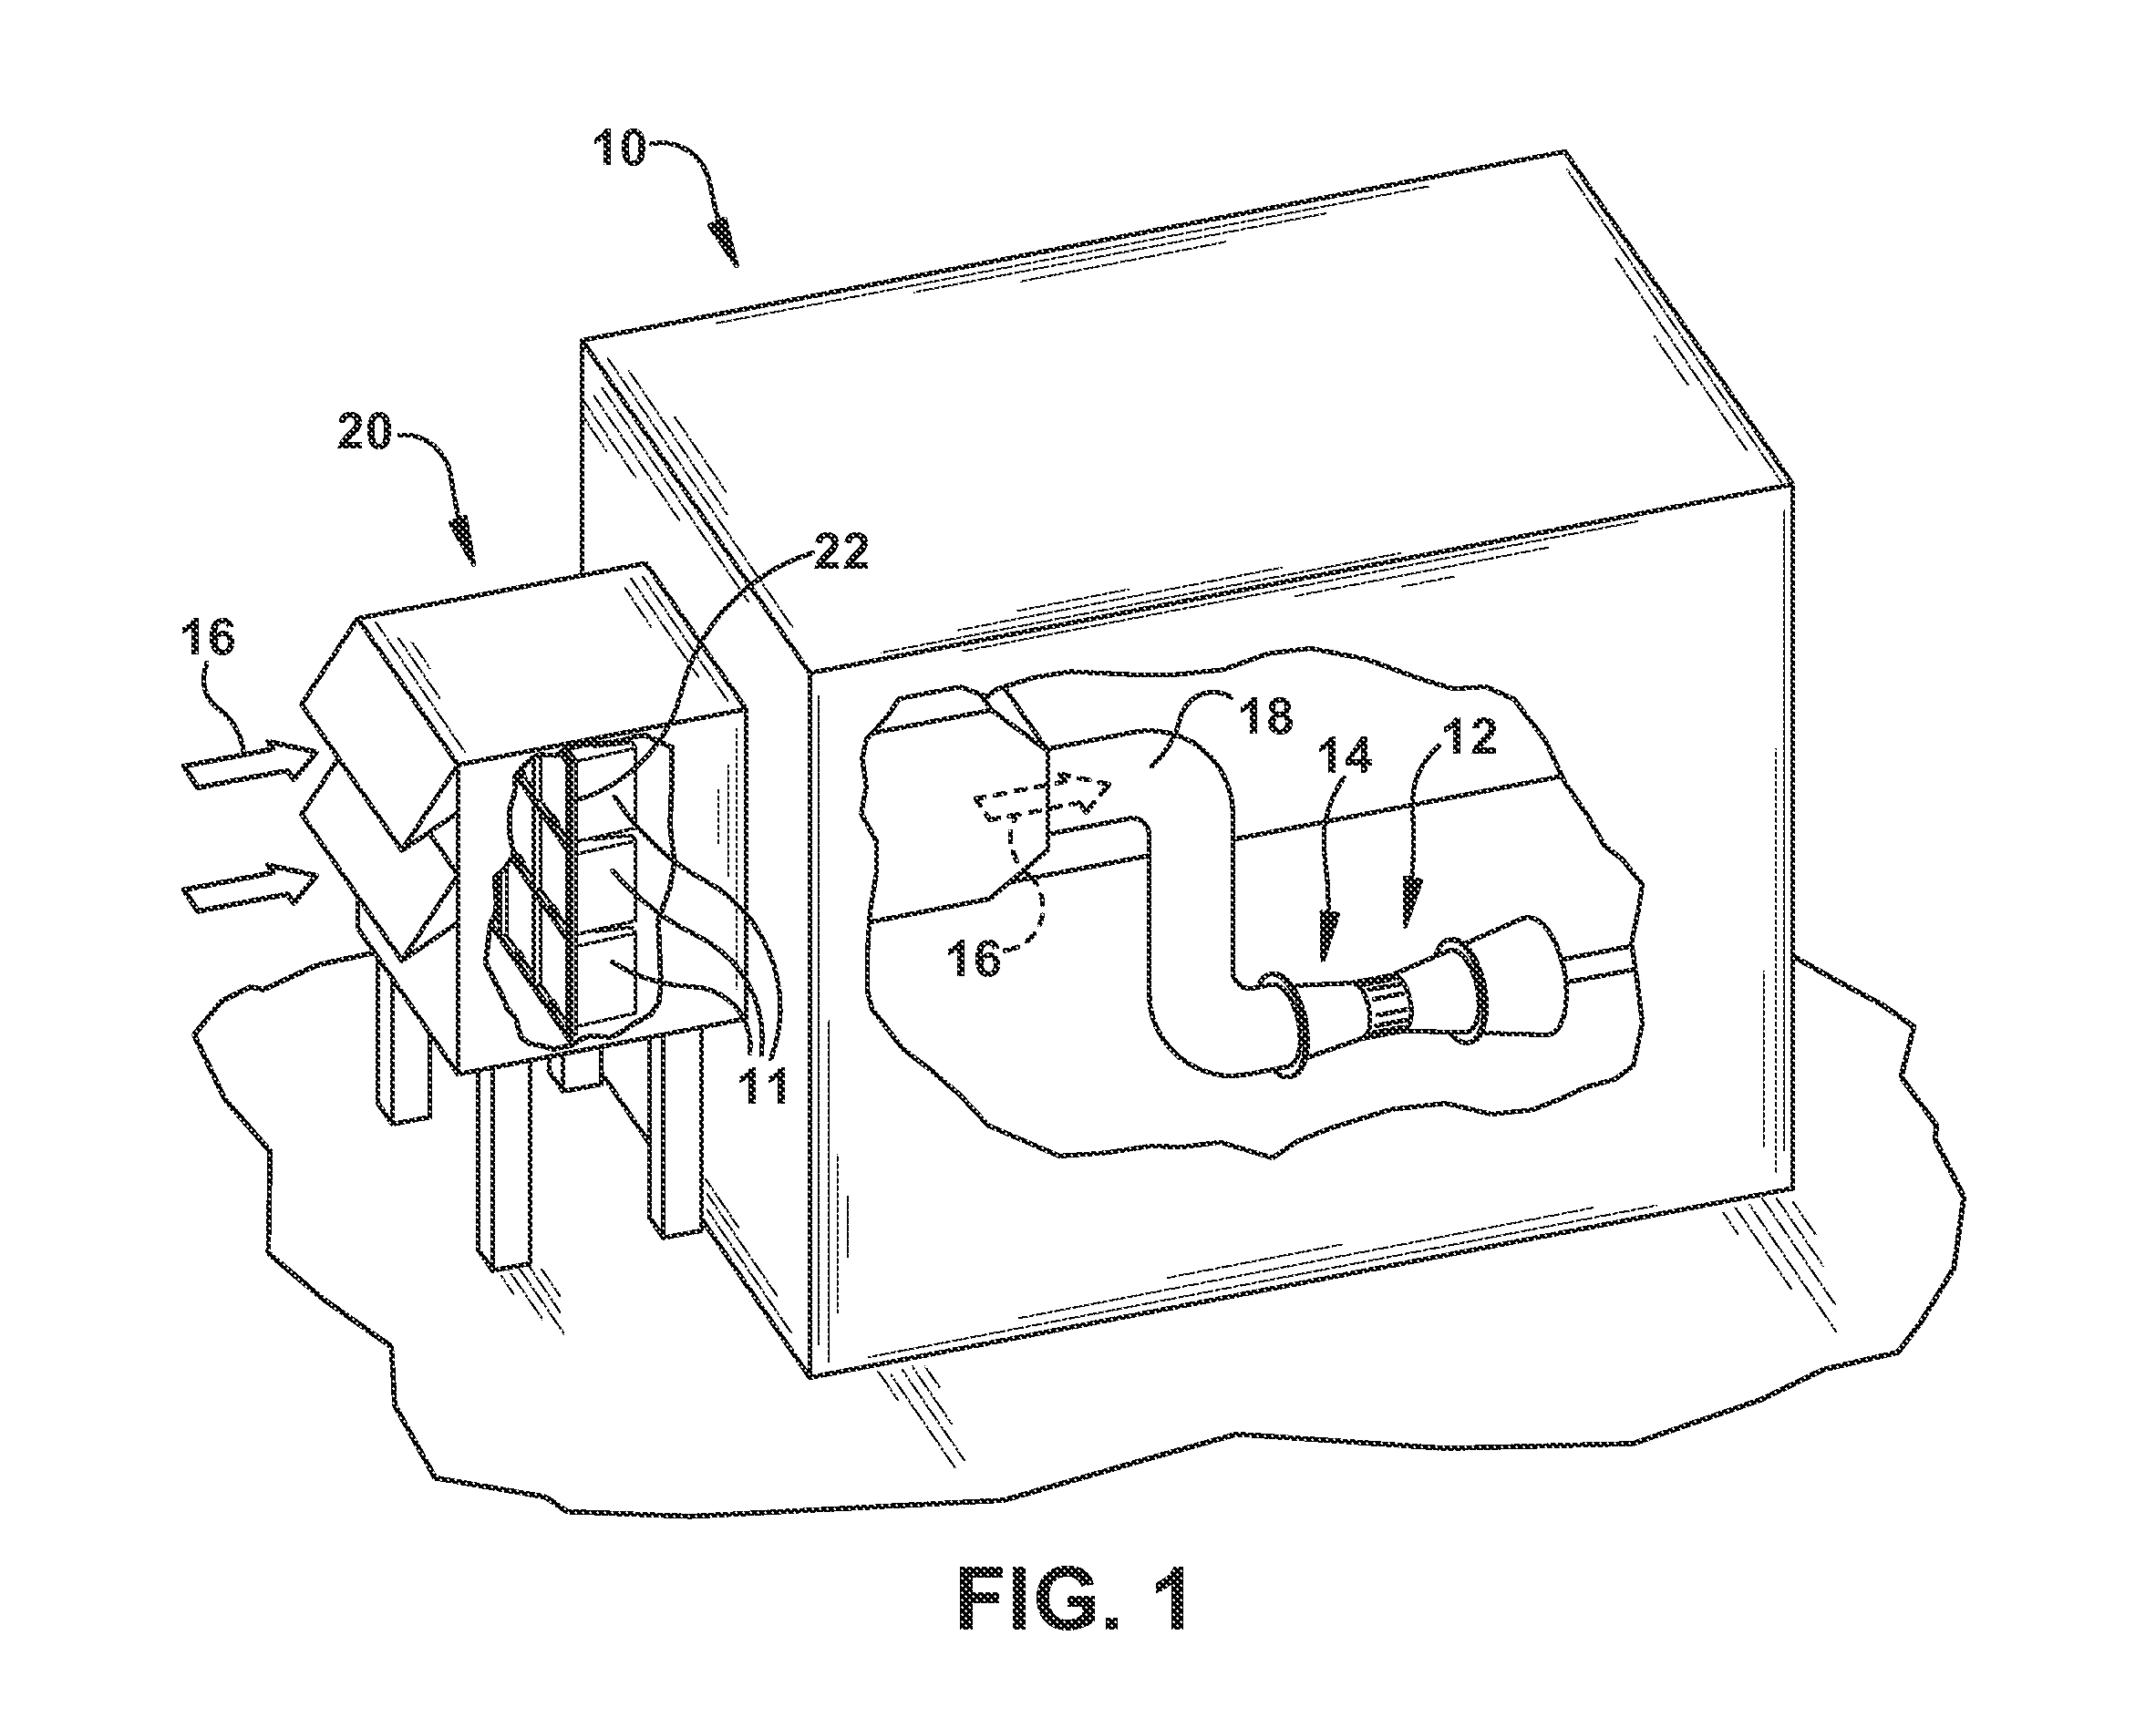 Filter bag assembly with rigid mesh for reducing filter pressure loss